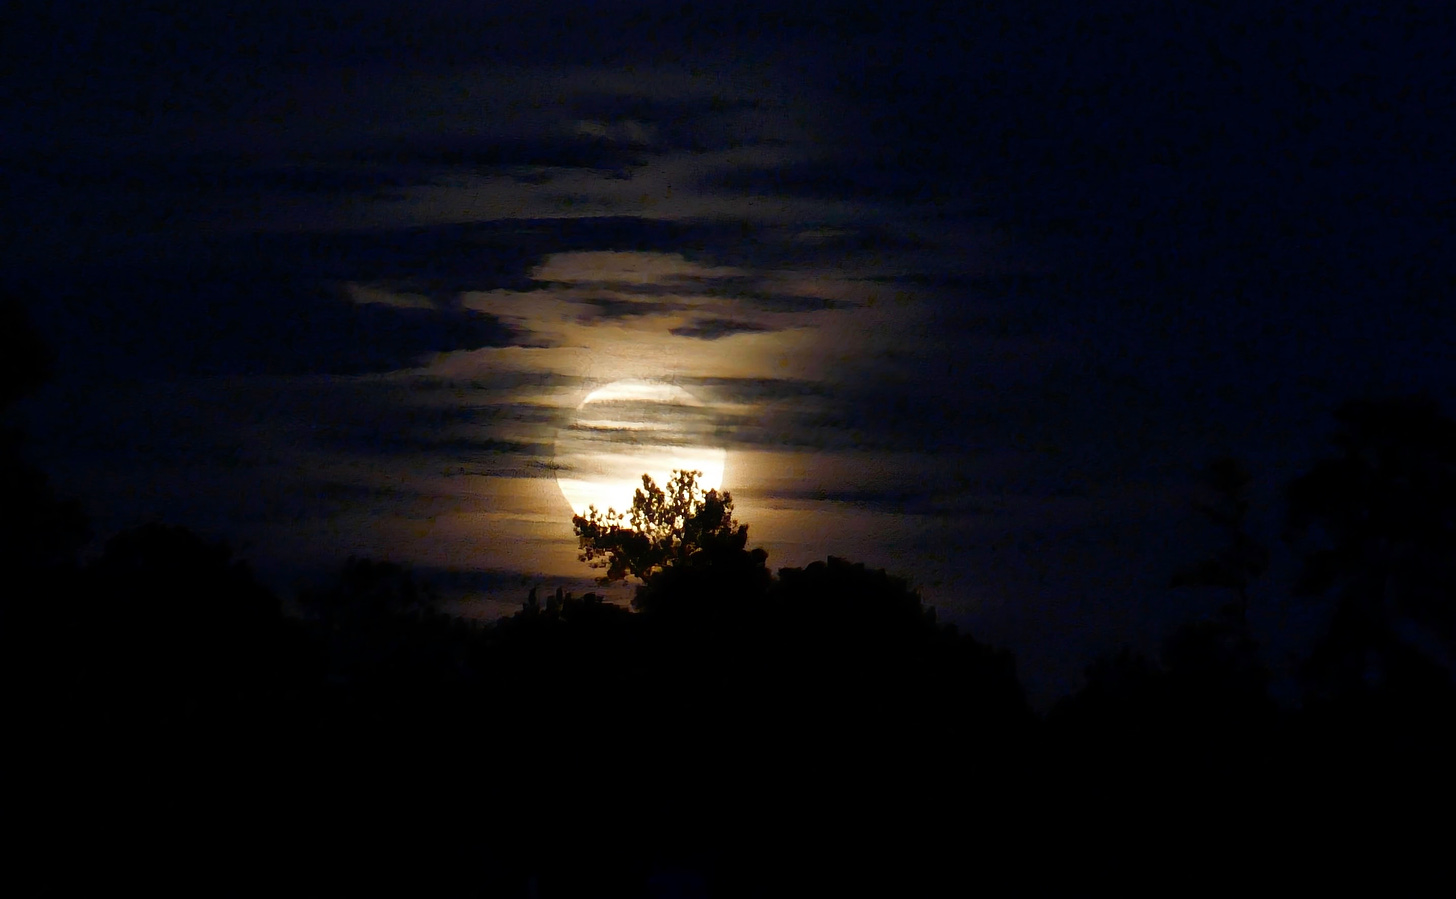 The full moon with wisps of clouds in front rising above the trees.